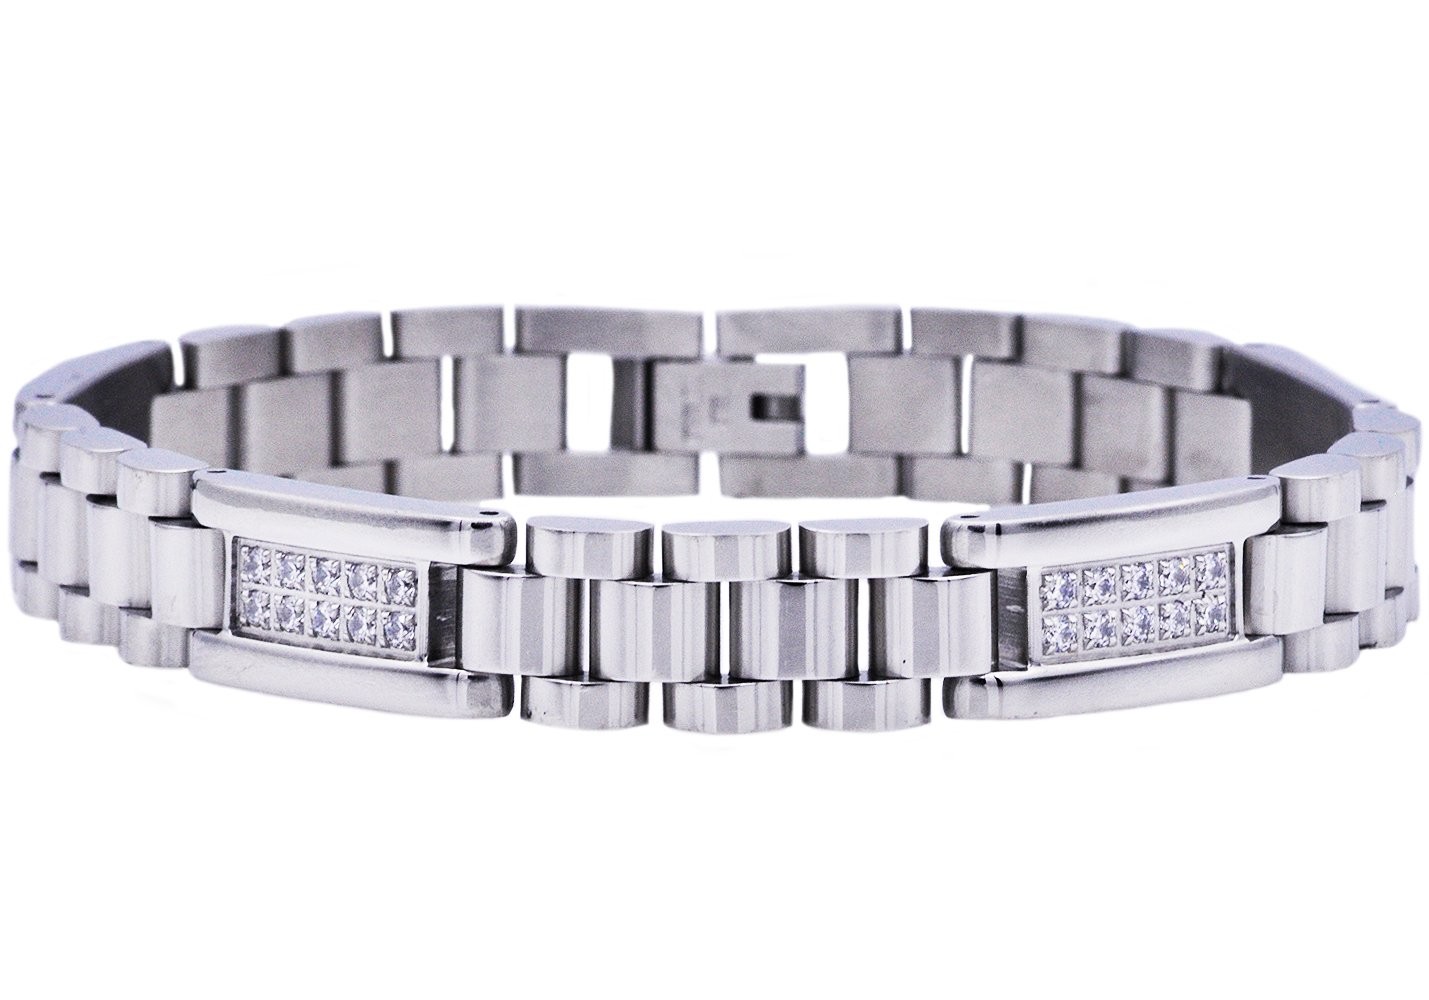 Stainless Steel Men's Polished Link Bracelet With Cubic Zirconia